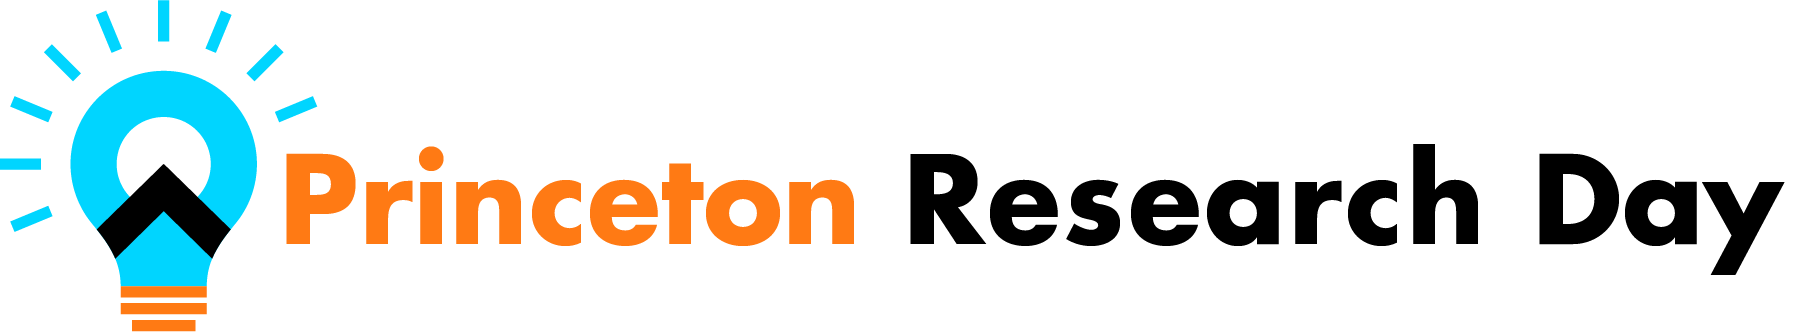 Princeton Research Day logo with lightbulb.